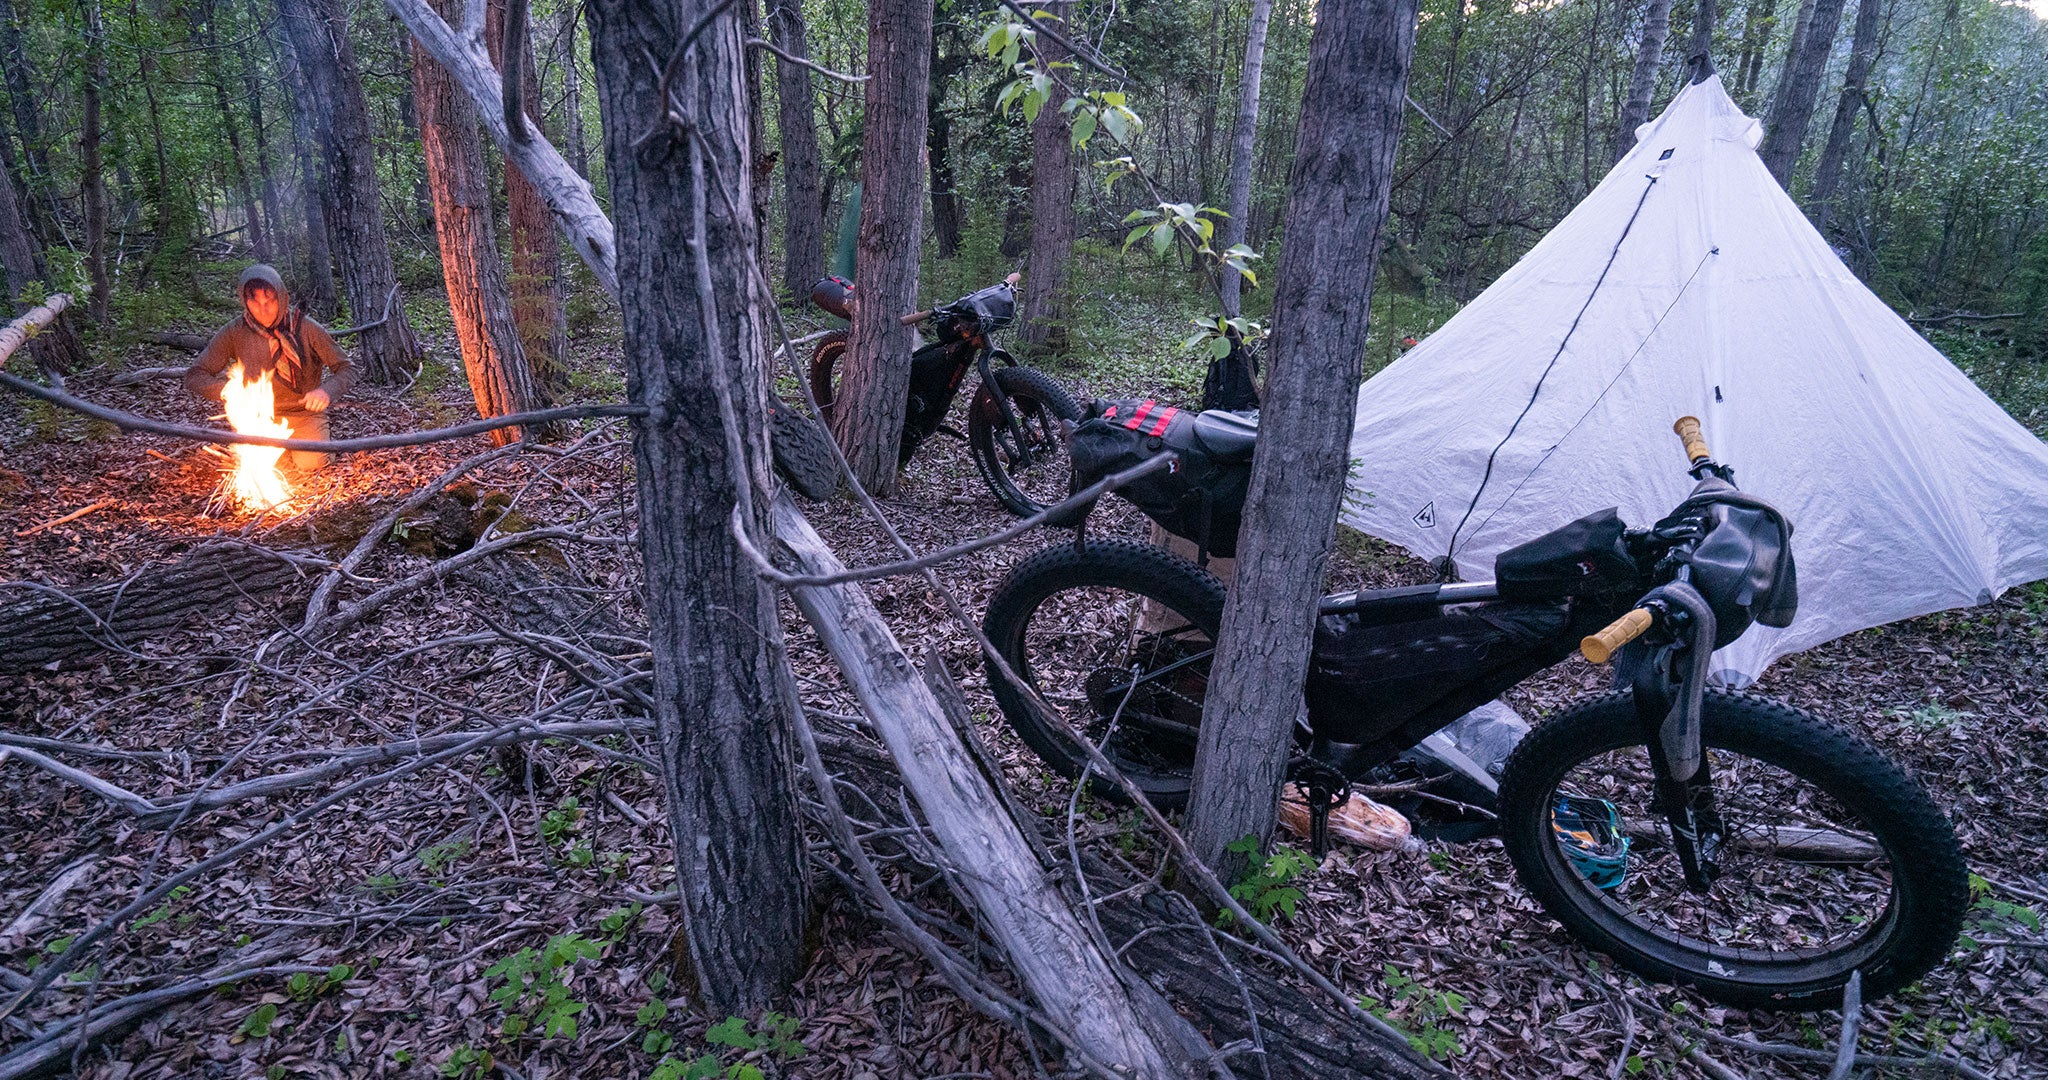 Backcountry camp set up between trees